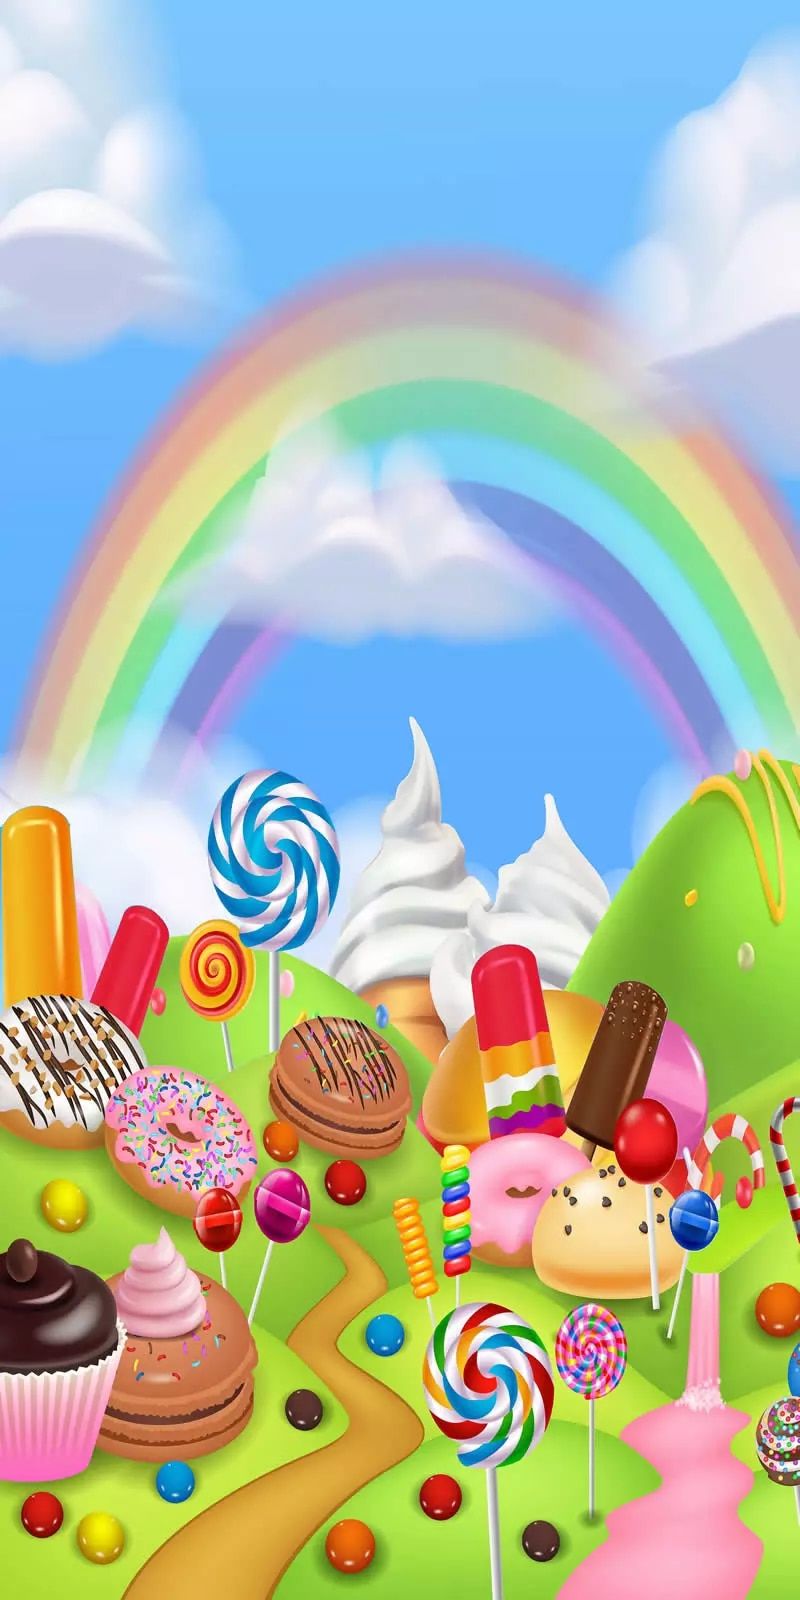 LIFE MAGIC BOX Candy Land Backdrops Children Birthday Baby Shower Fantasy Photography Background Candy Bar Ice Cream Wallpaper. Background